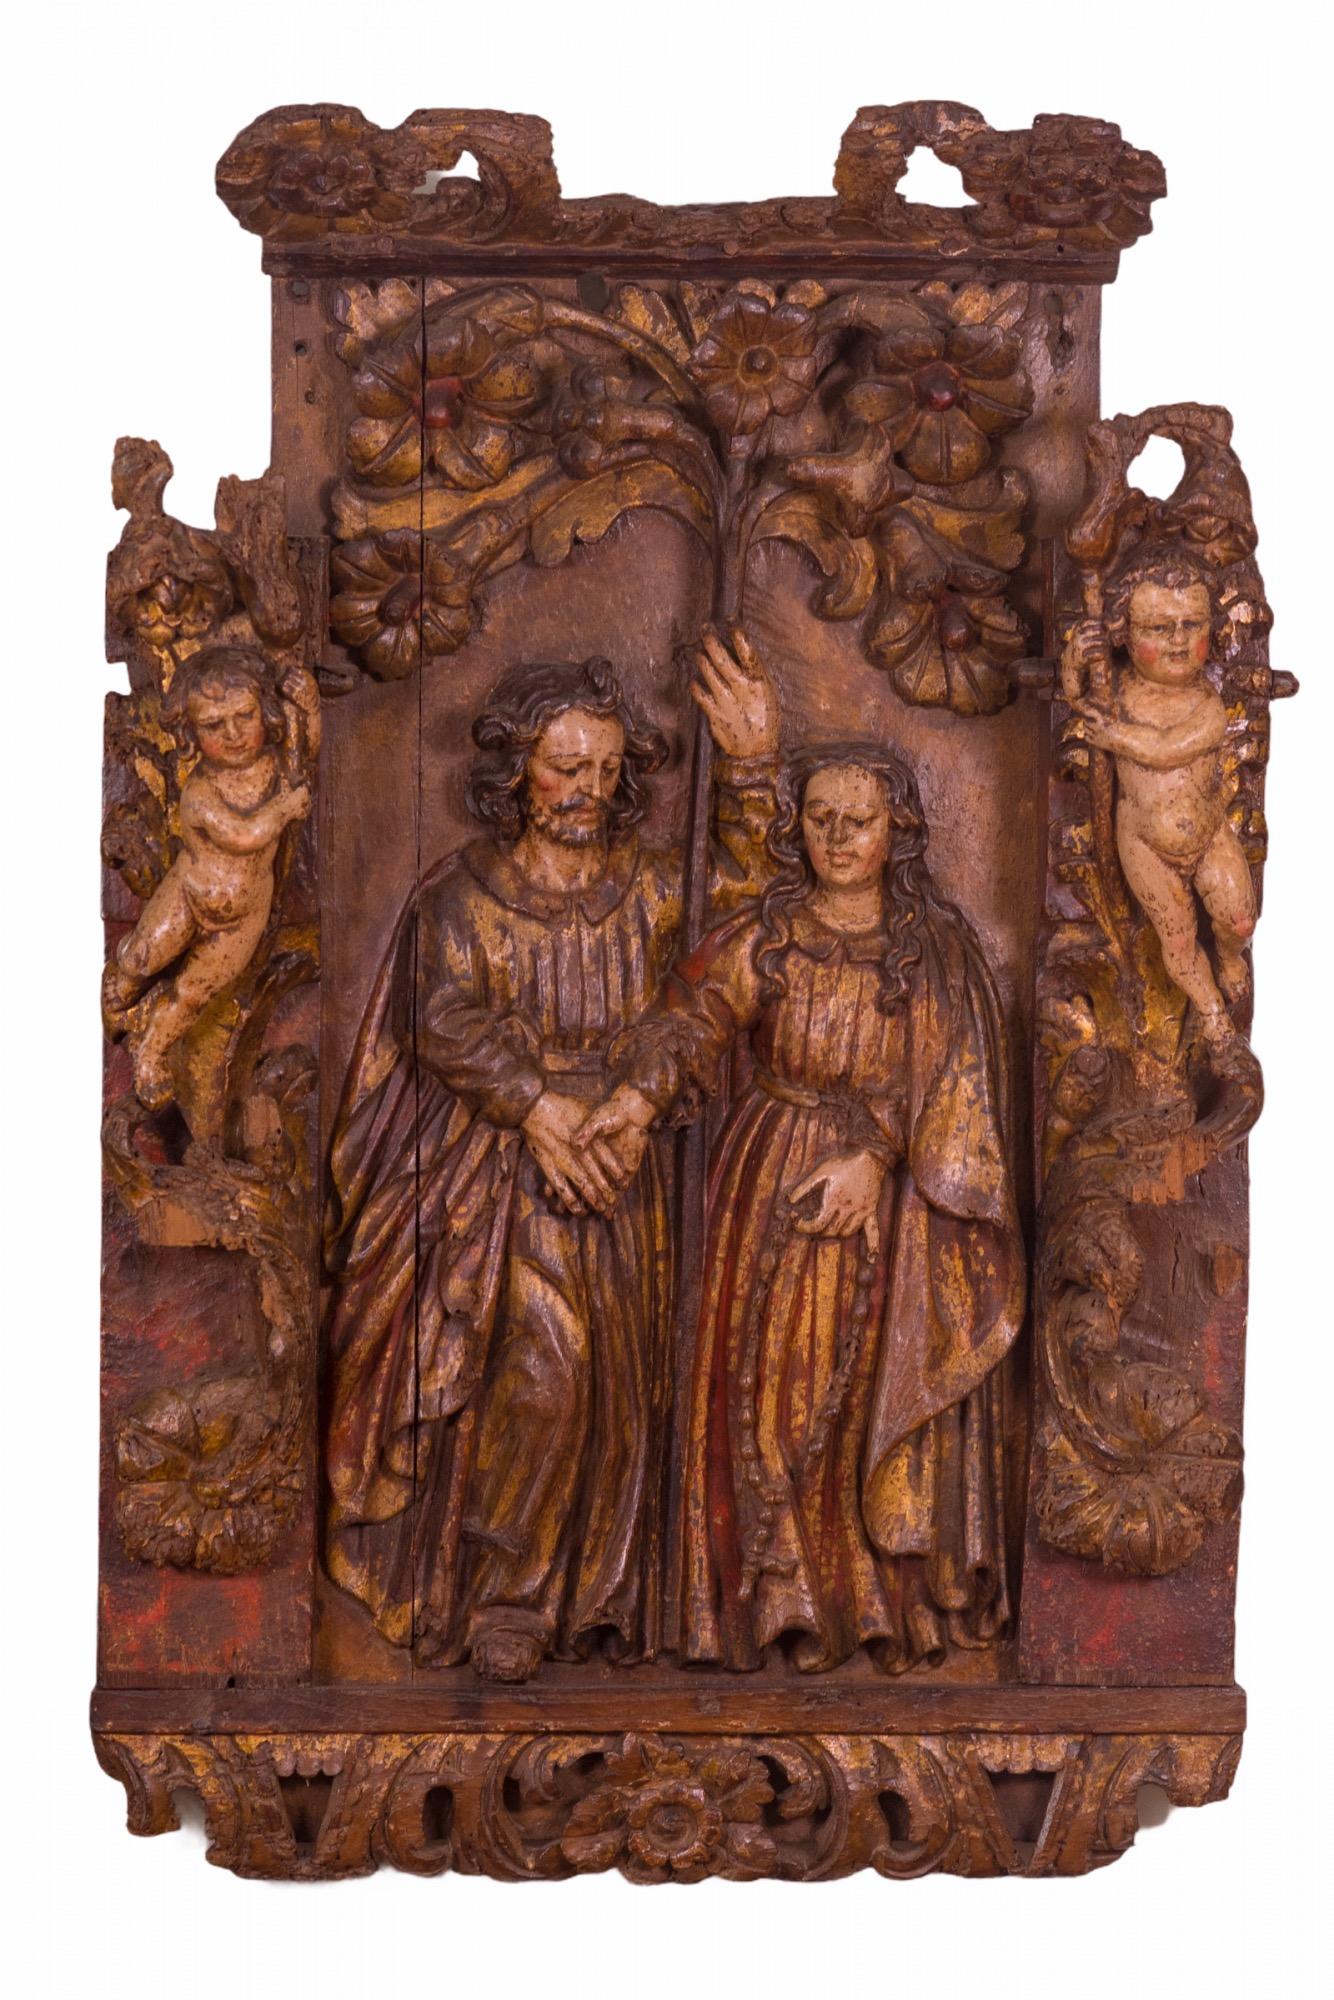 Early 16th Century Spanish carved-wood and polychromed panel of The Betrothal and Love of Joseph and Mary mounted on a Lucite panel and framed with a walnut wood hand-finished frame.